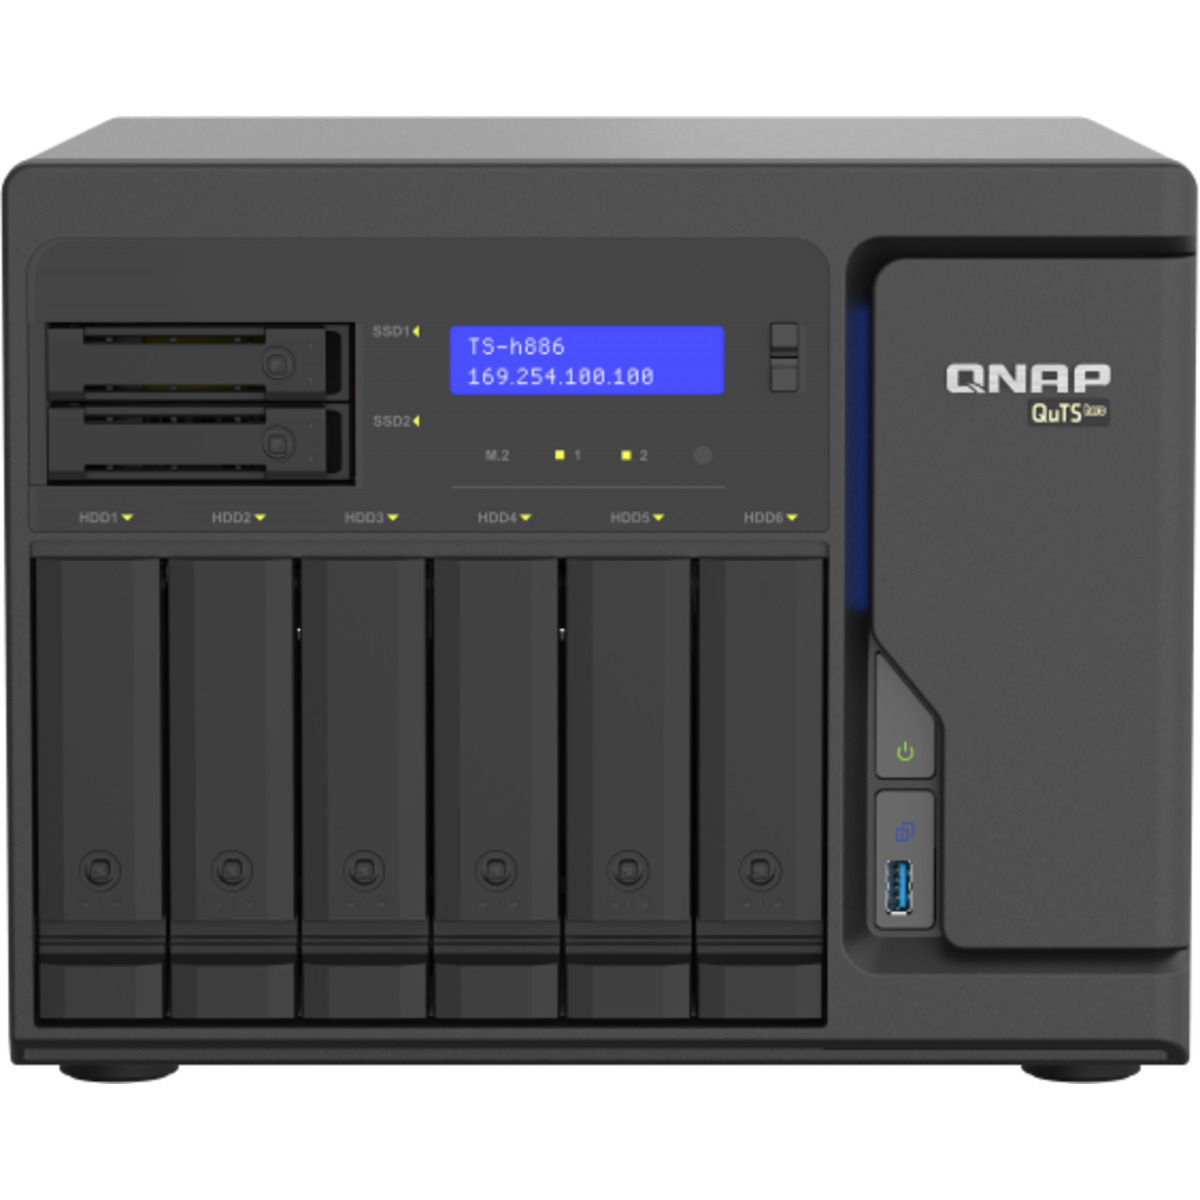 QNAP TS-h886 QuTS hero NAS 12tb 6+2-Bay Desktop Large Business / Enterprise NAS - Network Attached Storage Device 3x4tb Crucial MX500 CT4000MX500SSD1 2.5 560/510MB/s SATA 6Gb/s SSD CONSUMER Class Drives Installed - Burn-In Tested TS-h886 QuTS hero NAS